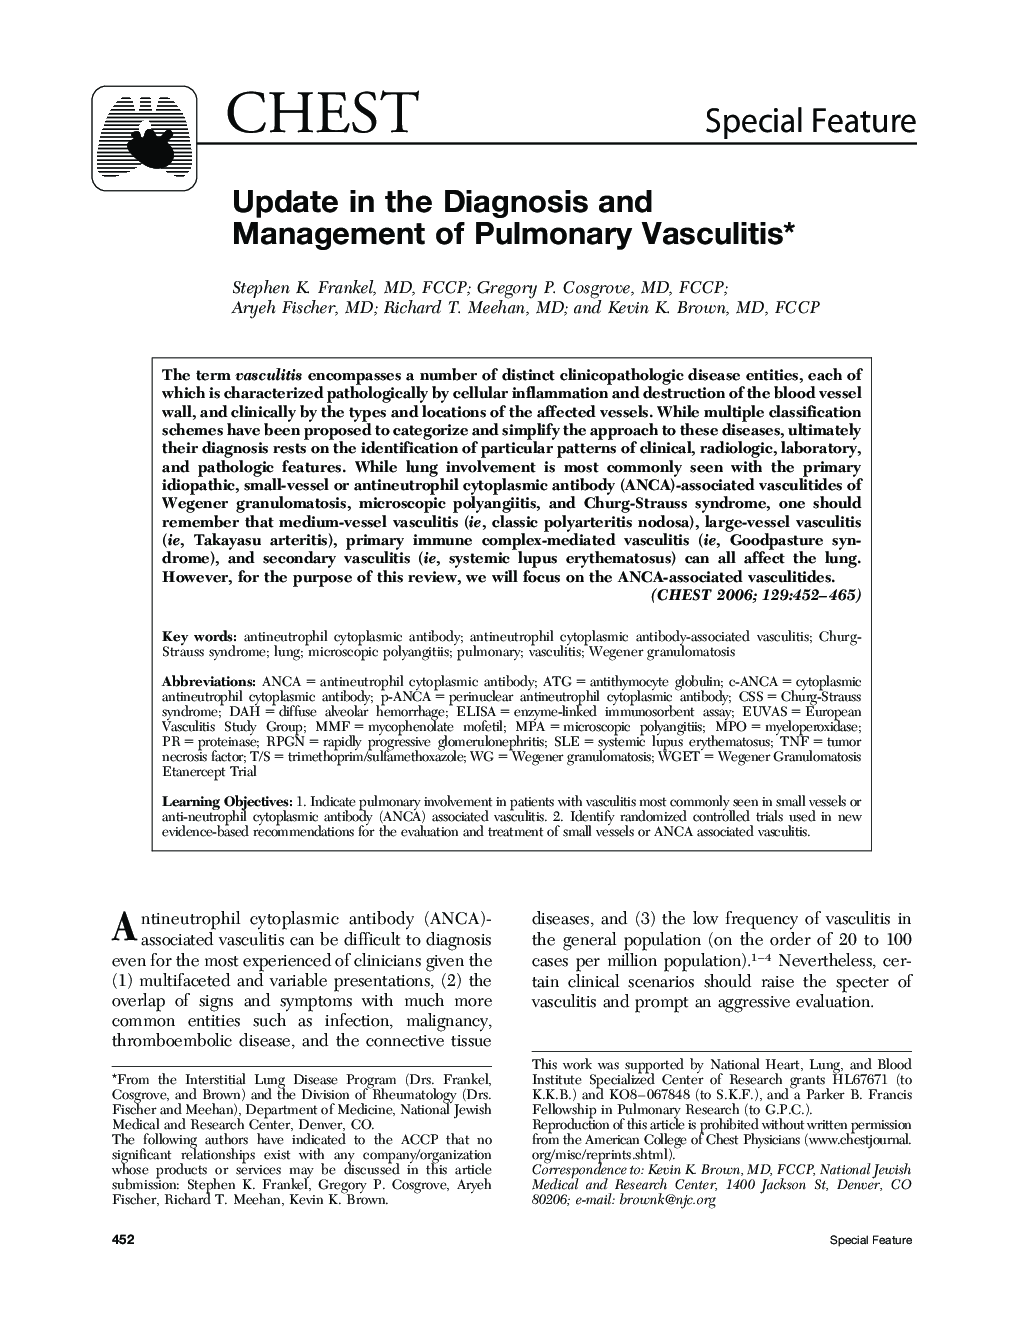 Update in the Diagnosis and Management of Pulmonary Vasculitis 